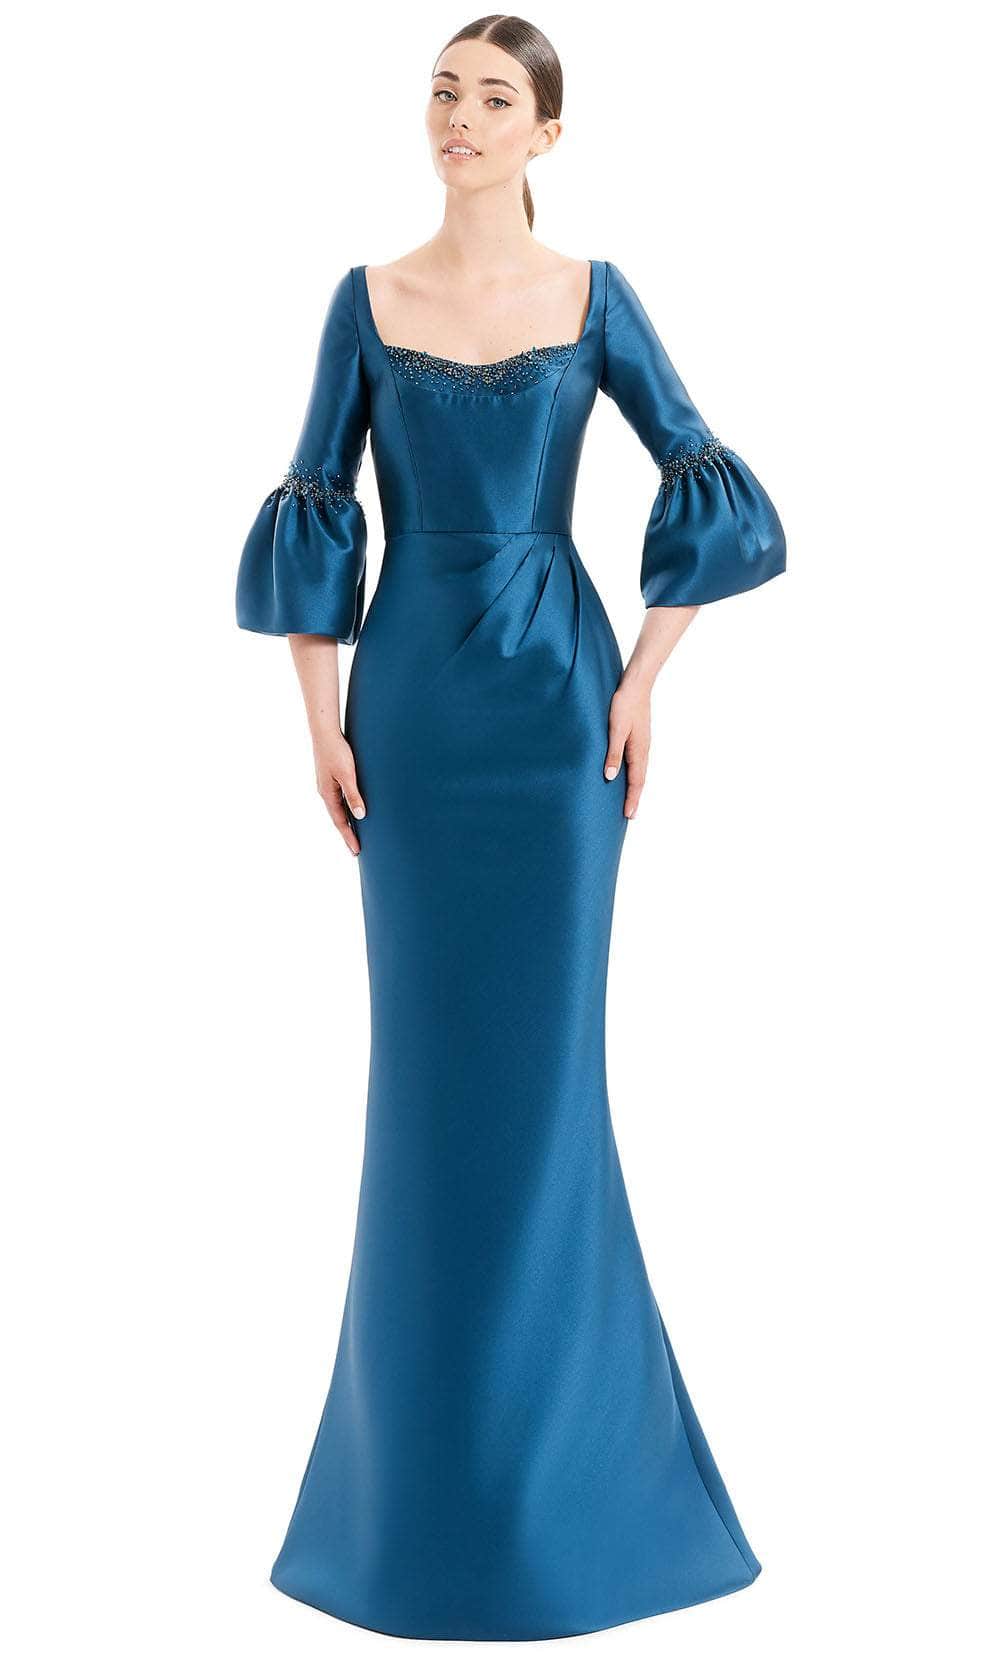 Alexander By Daymor 1659F22 - Mermaid Skirt Formal Gown Special Occasion Dress 4 / Teal Blue